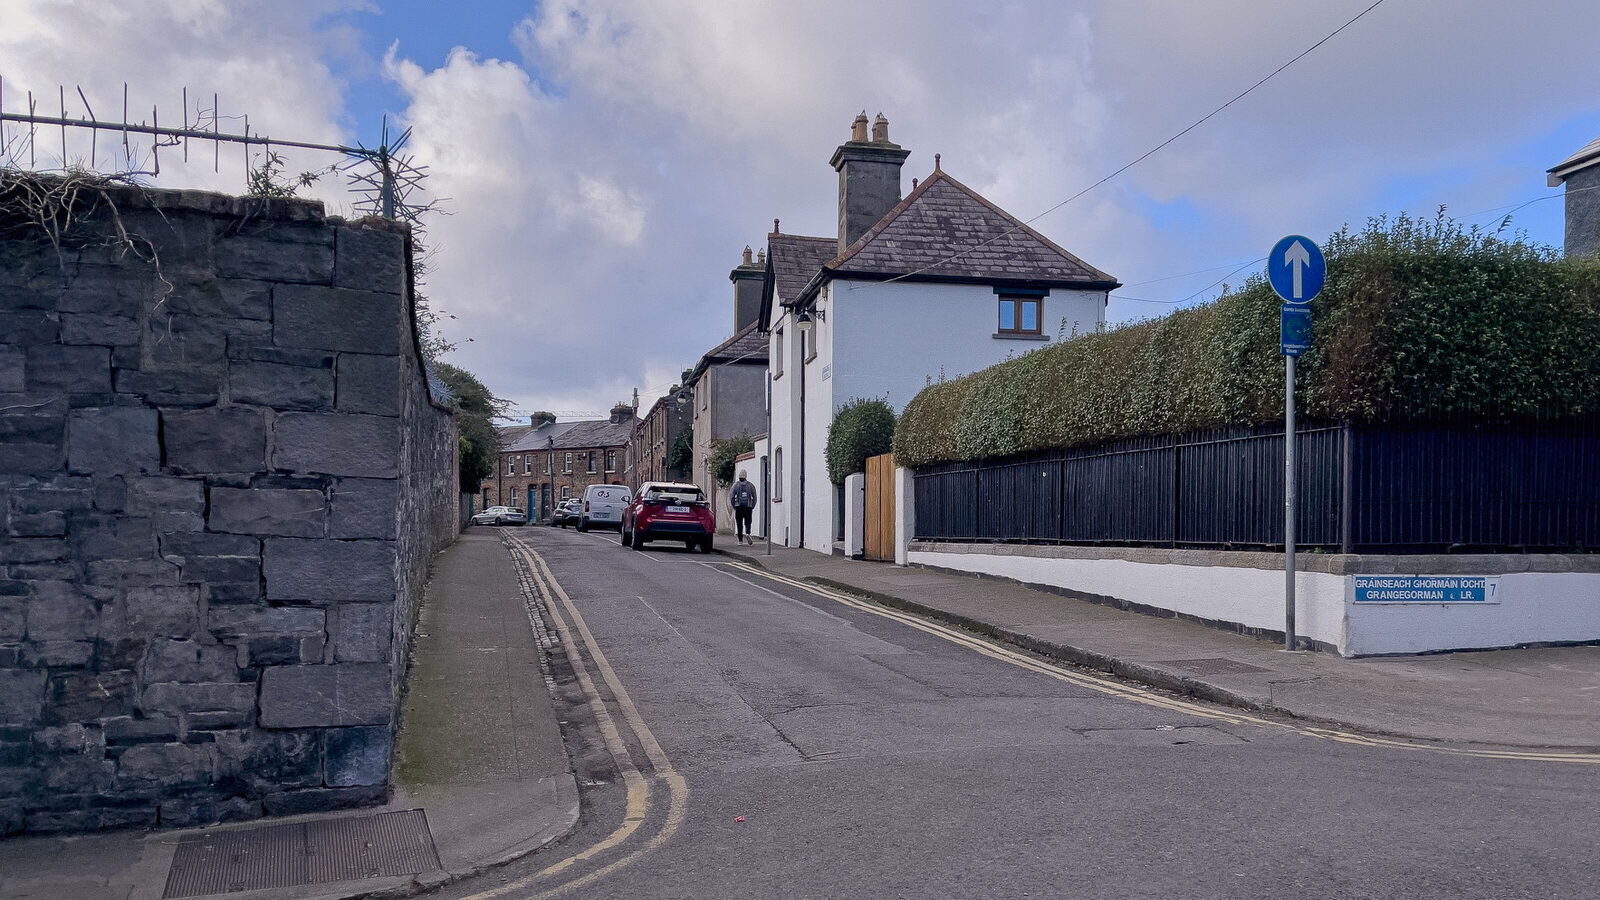 EXPLORING GRANGEGORMAN LOWER [WHICH IS BOTH A STREET AND AN AREA OR DISTRICT]-229025-1